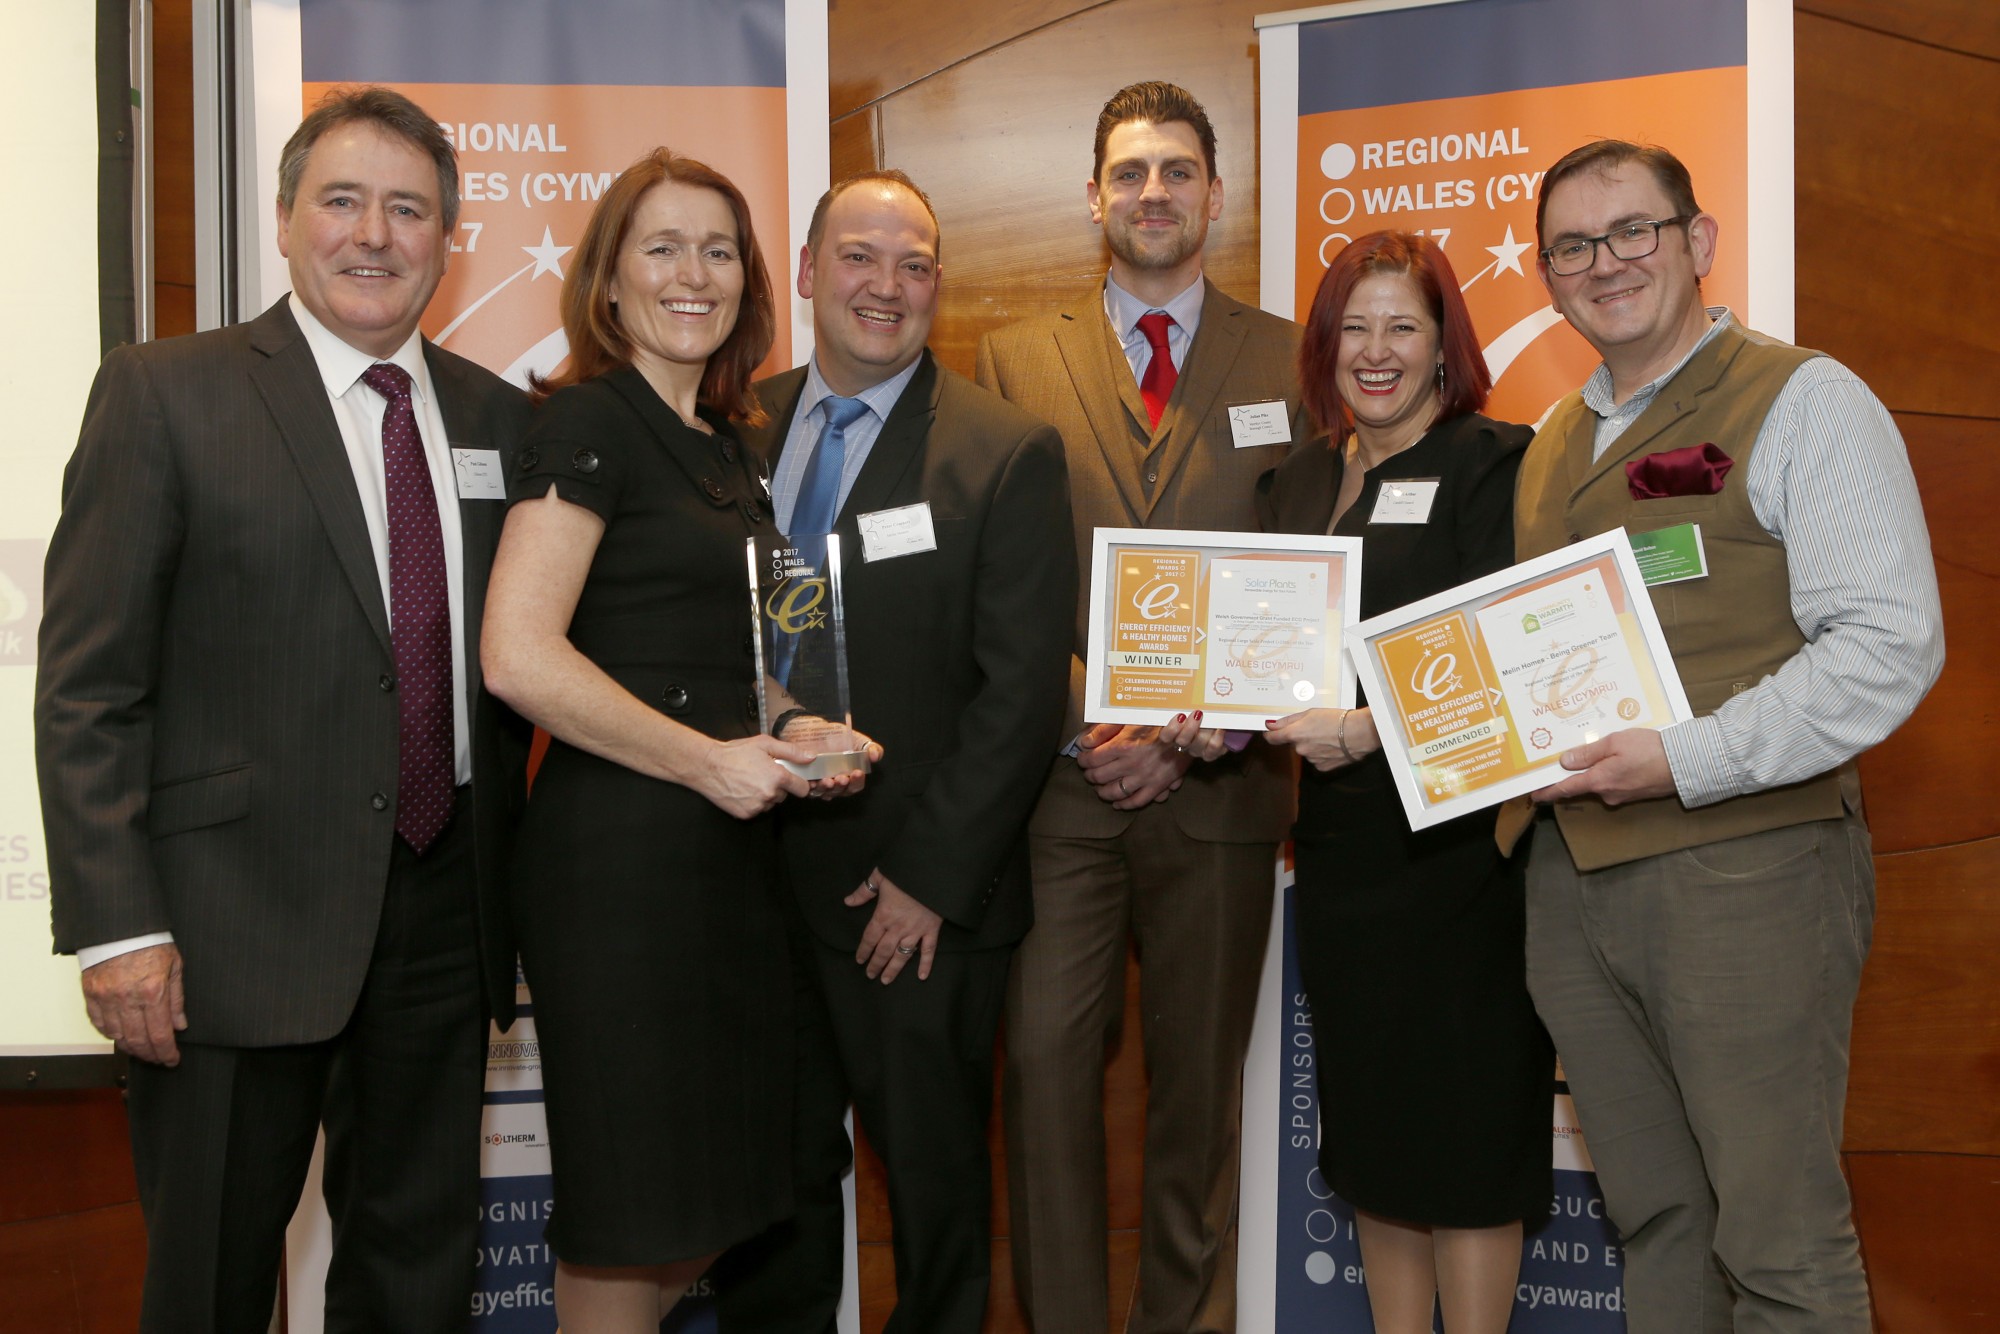 Award Success for our Being Greener Team